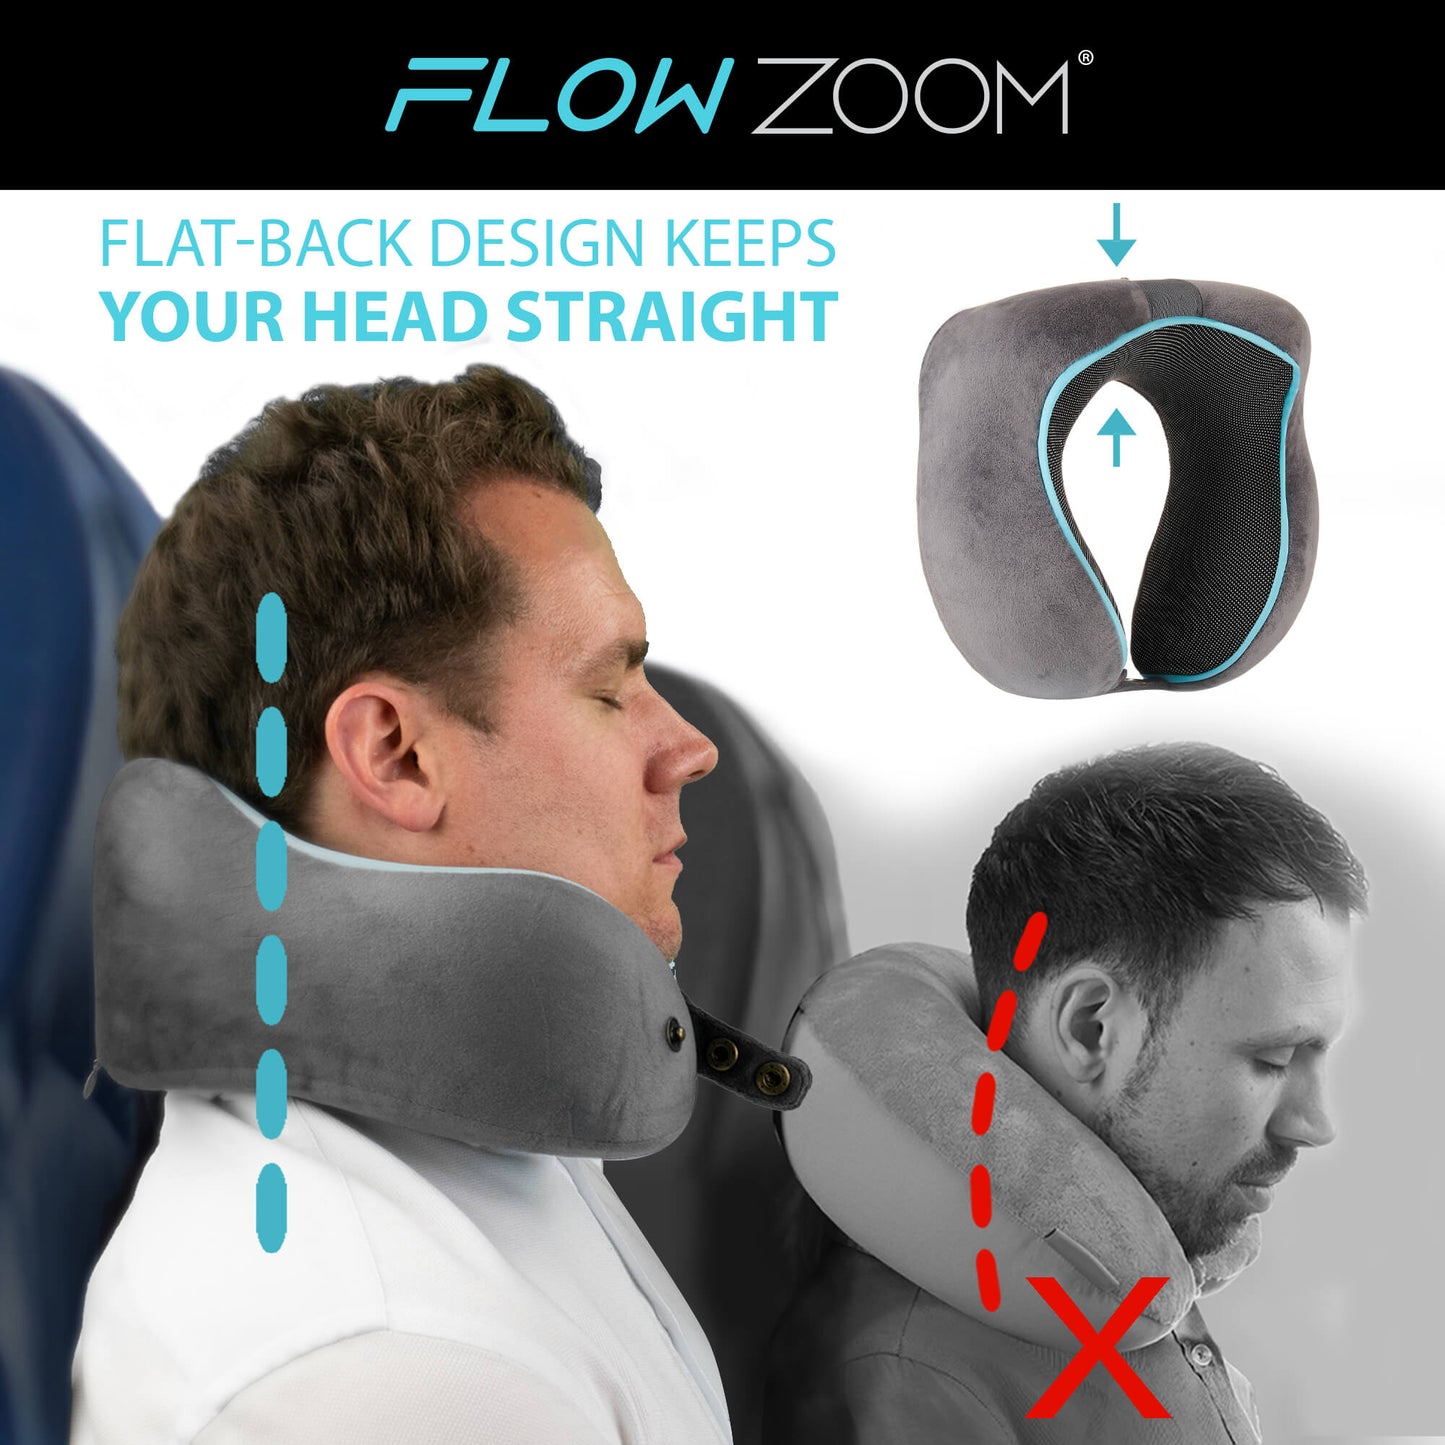 Memory foam travel pillow with flat-back design